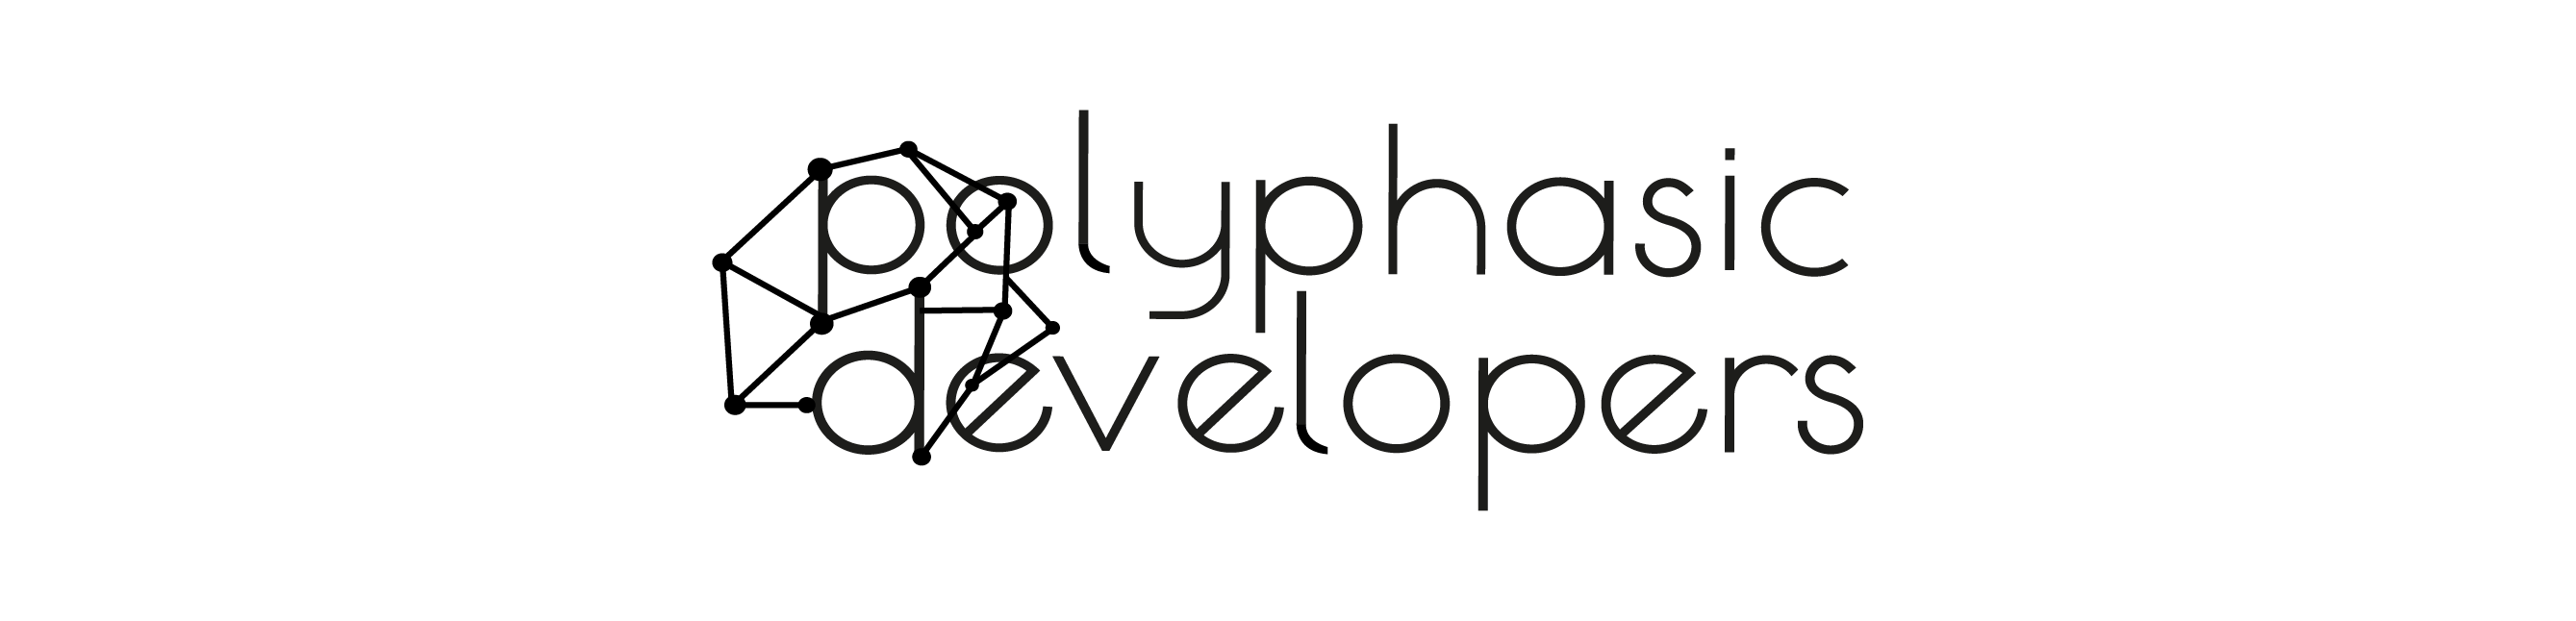 polyphasic developers